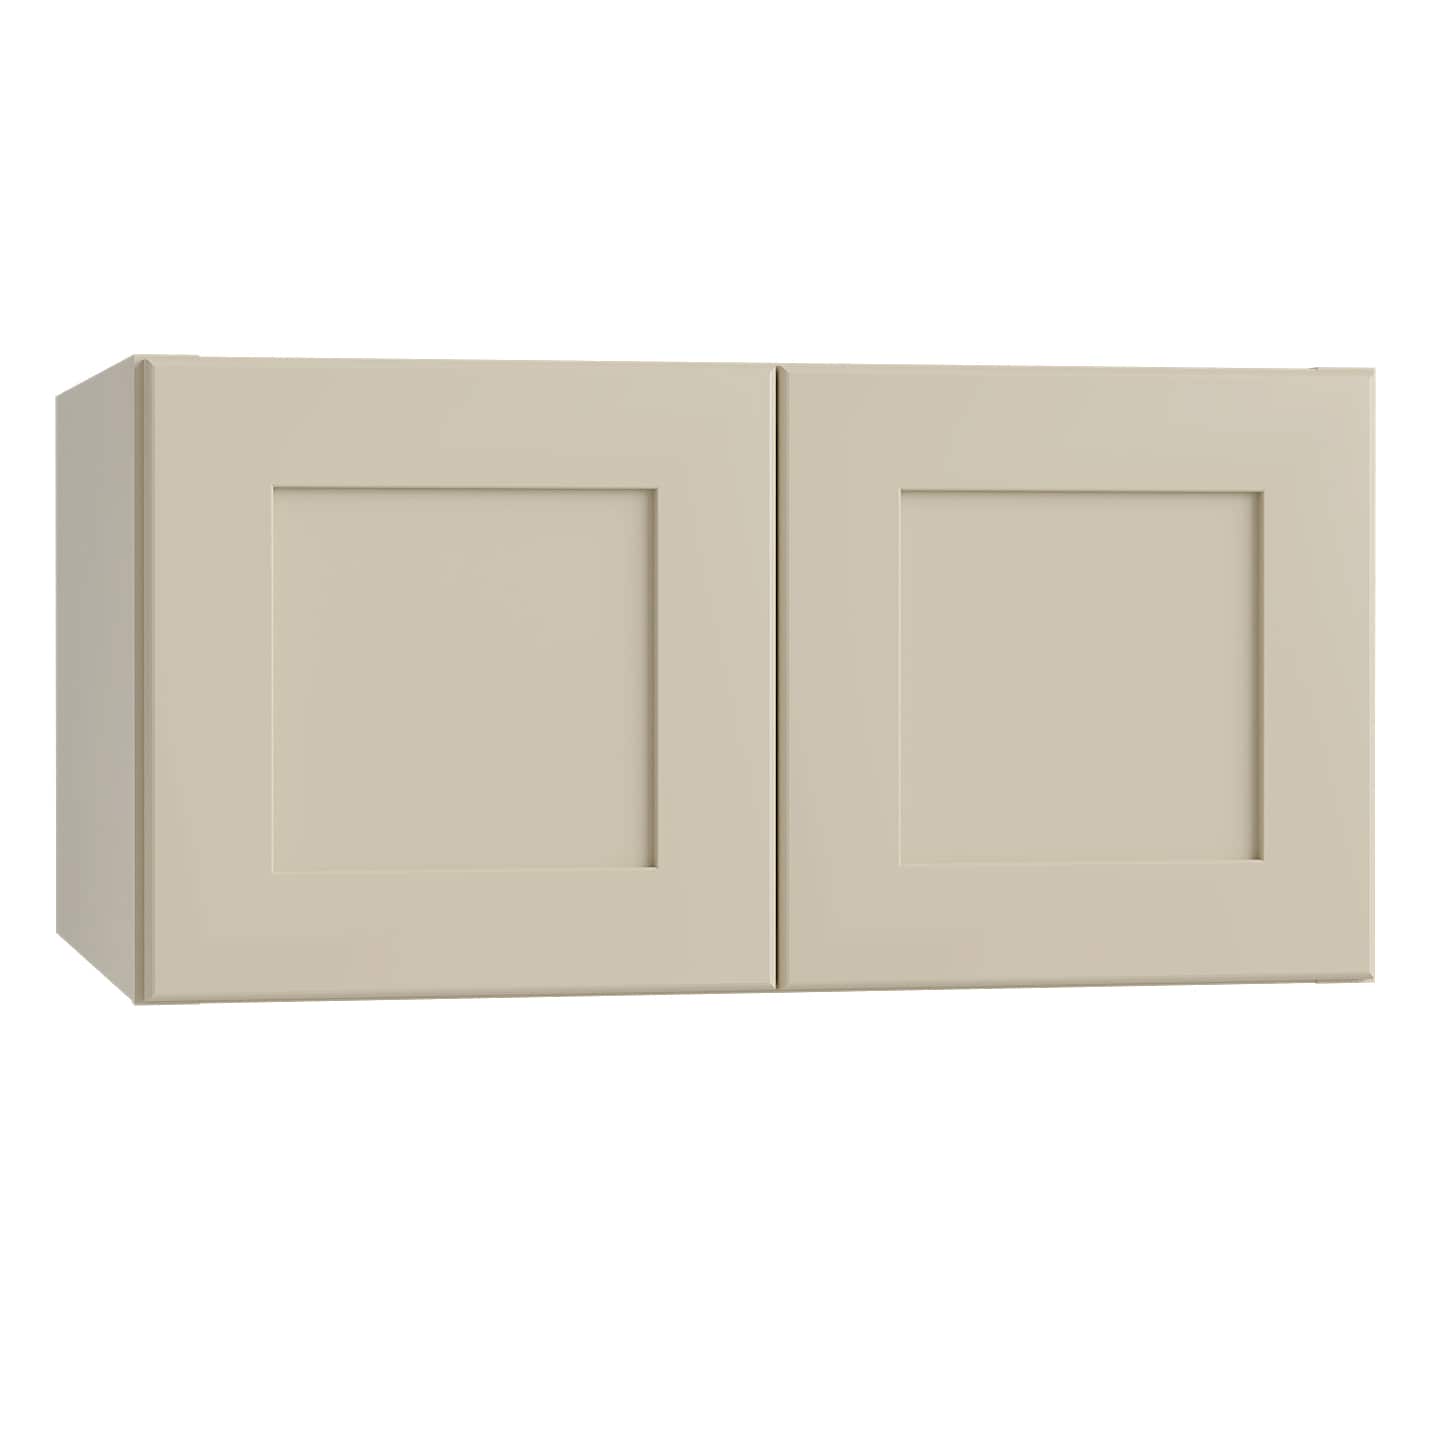 Luxxe Cabinetry 30-in W x 12-in H x 24-in D Norfolk Blended Cream Painted Door Wall Fully Assembled Semi-custom Cabinet in Off-White | W302412-NBC